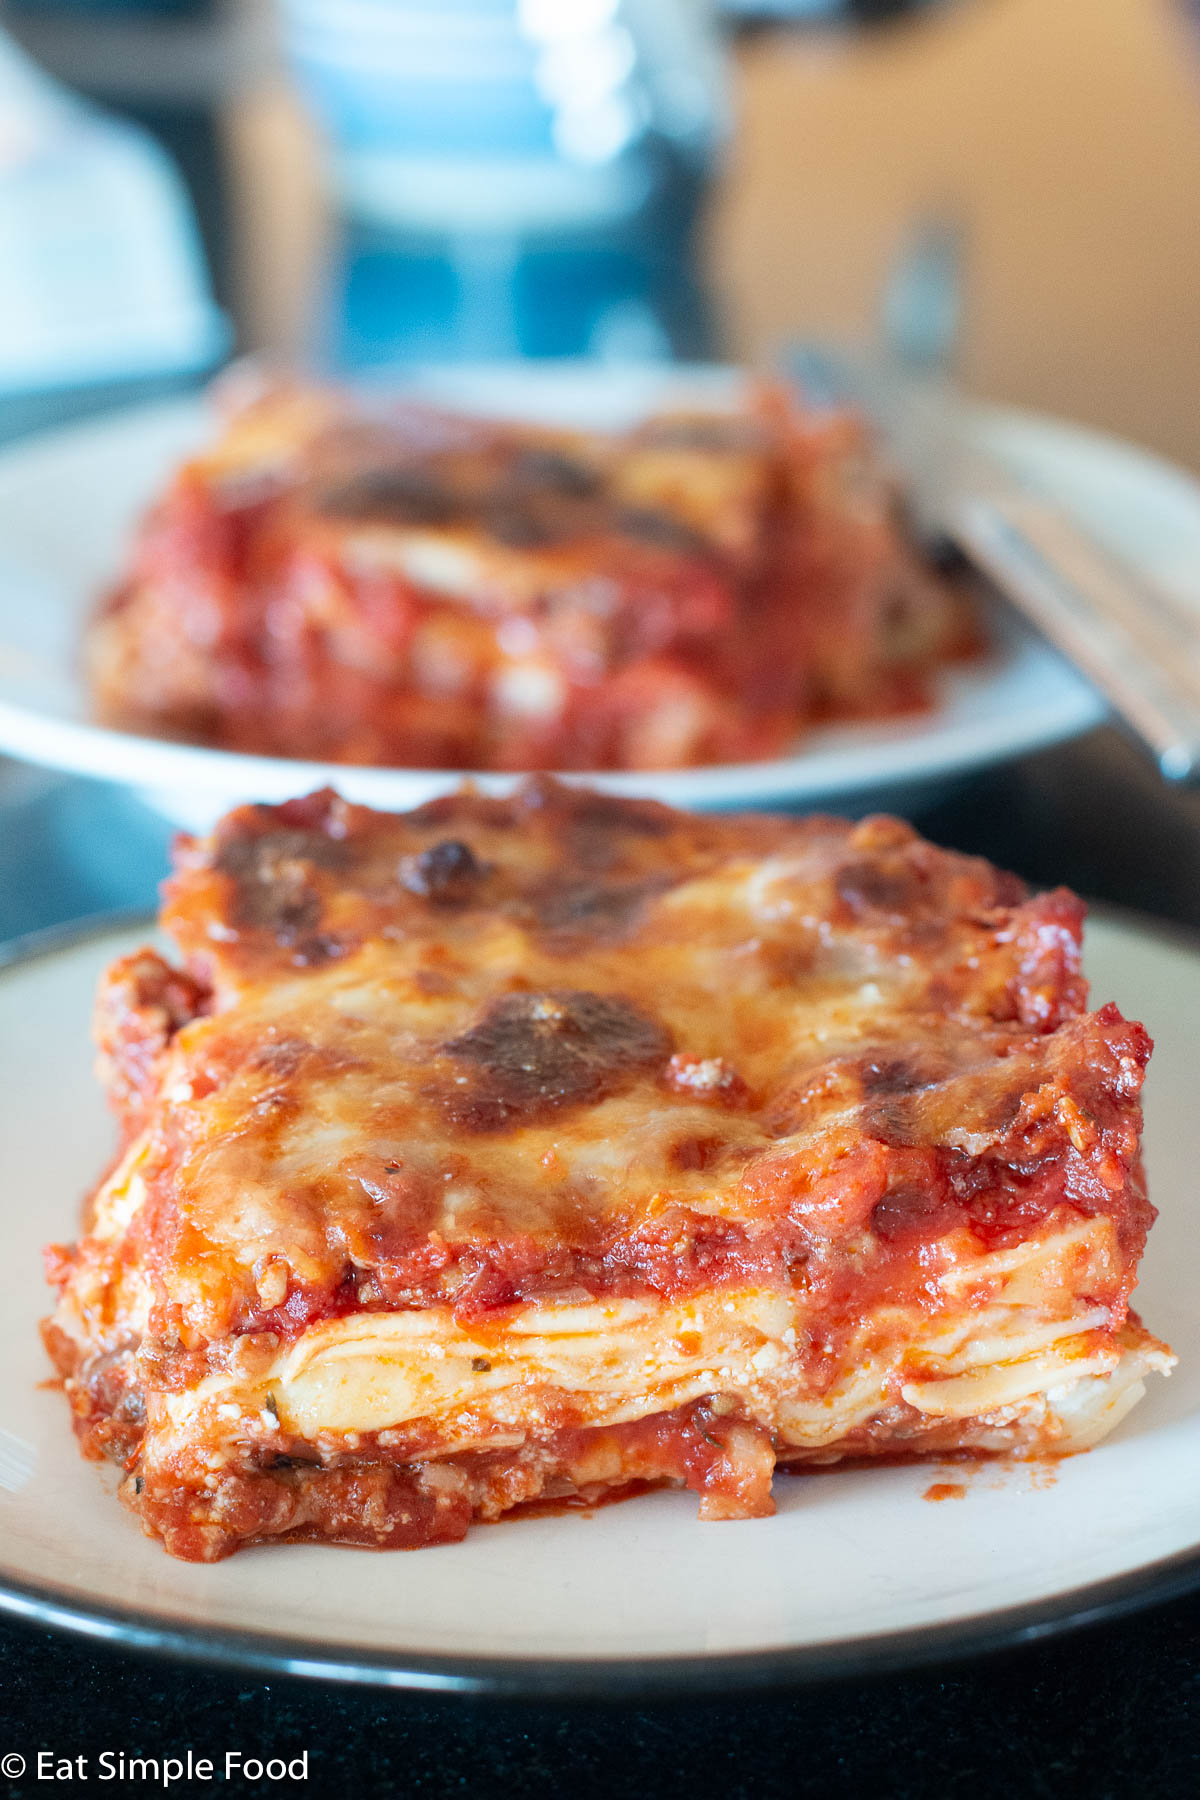 Slice of meat lasagna on a white plate with another slice in the background.